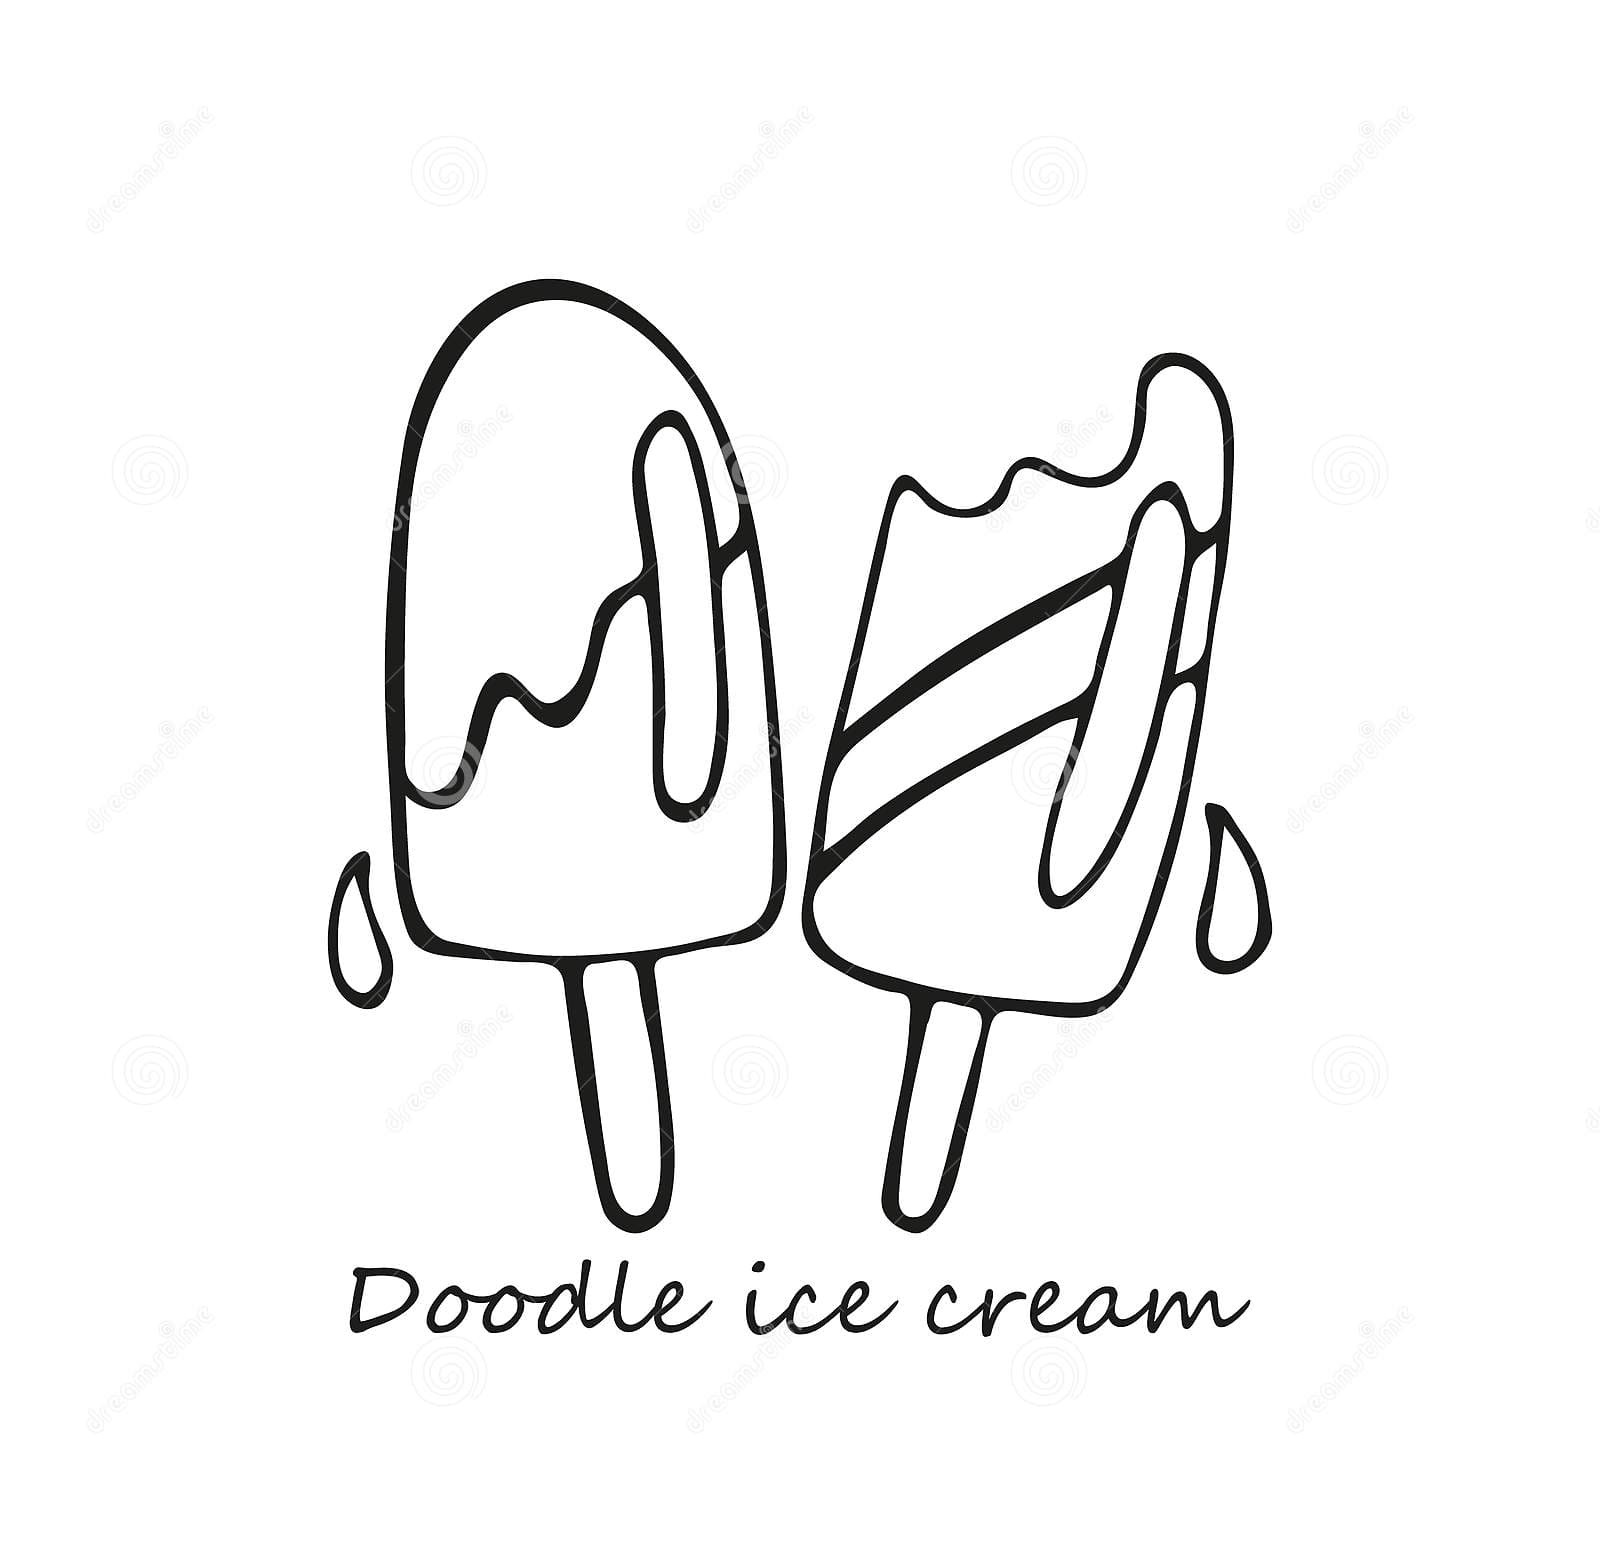 Two Hand-drawn Melting Ice Creams Popsicles